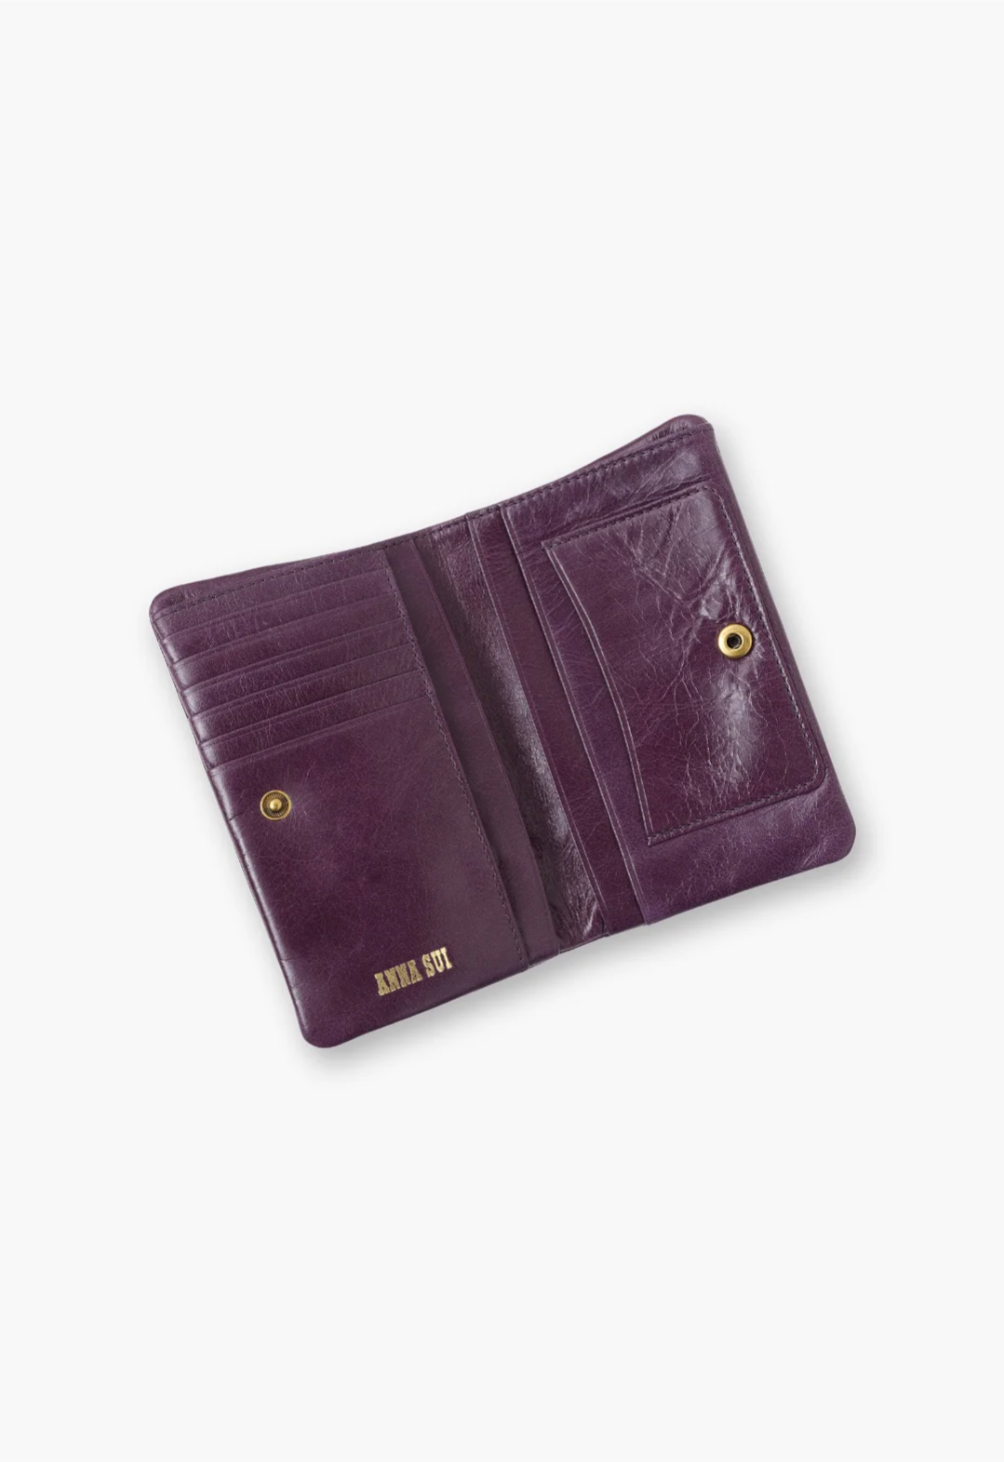 Wallet purple, 7 card slots, 4-compartments, 2-divided bill slots 1 front pouch for  storage